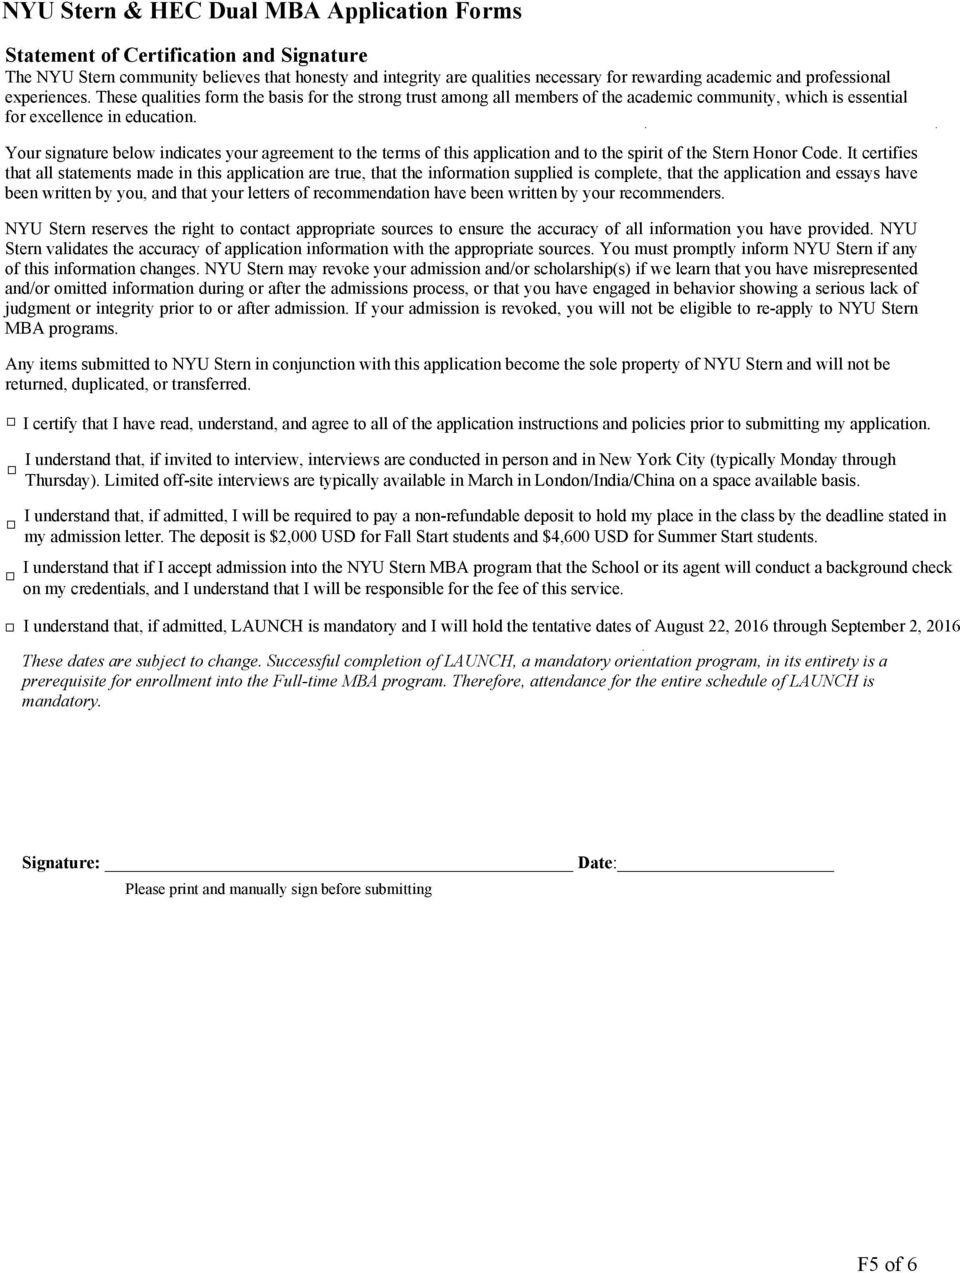 Nyu Stern Hec Dual Mba Application Pdf Free Download within dimensions 960 X 1273